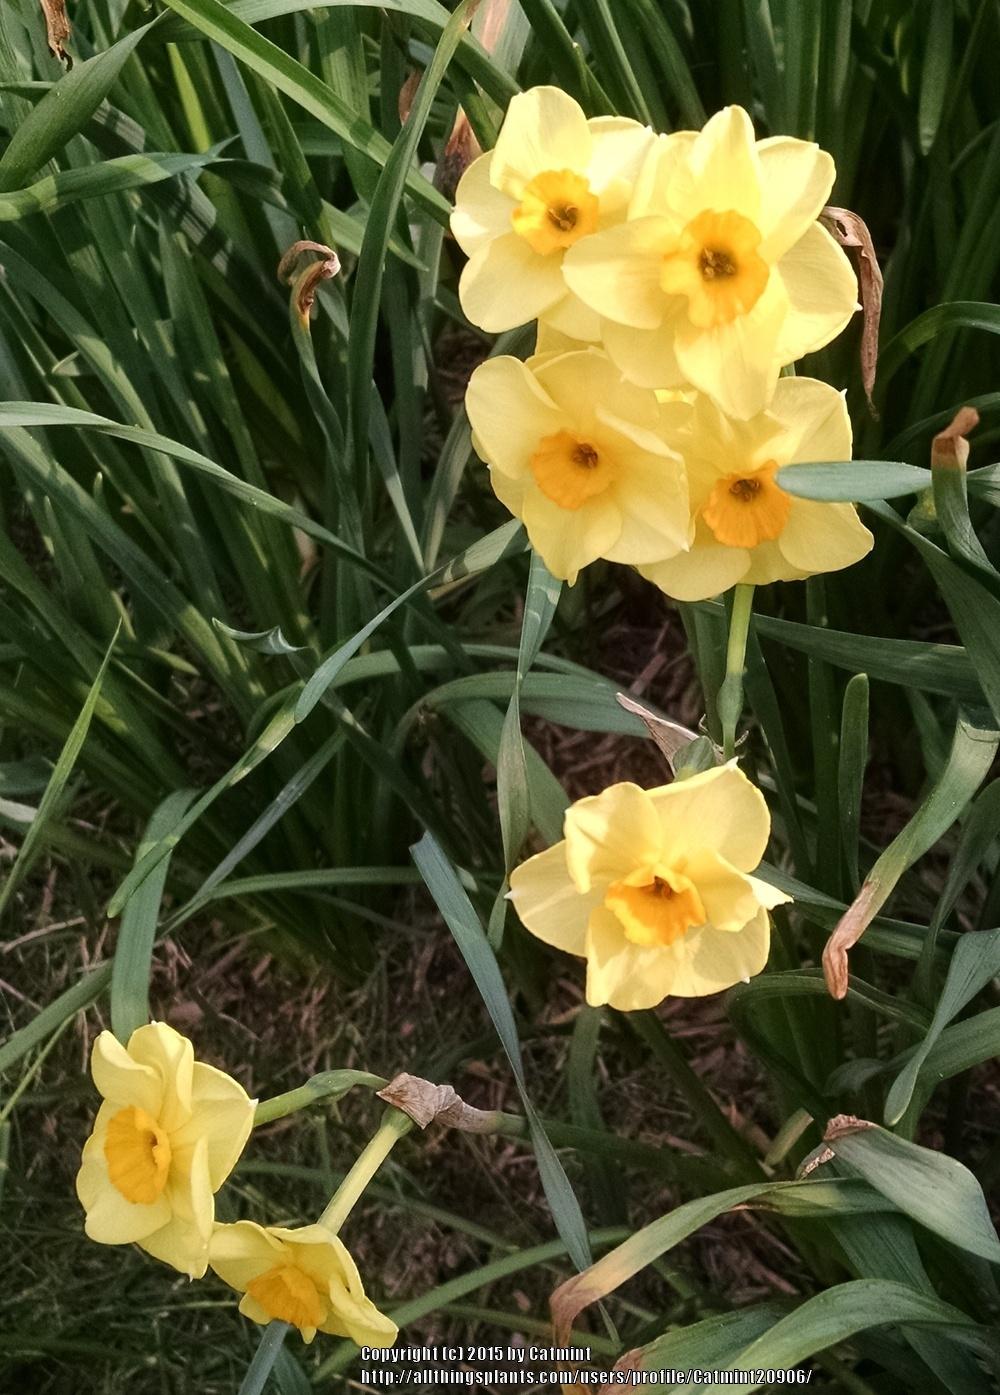 Photo of Tazetta Daffodil (Narcissus 'Martinette') uploaded by Catmint20906